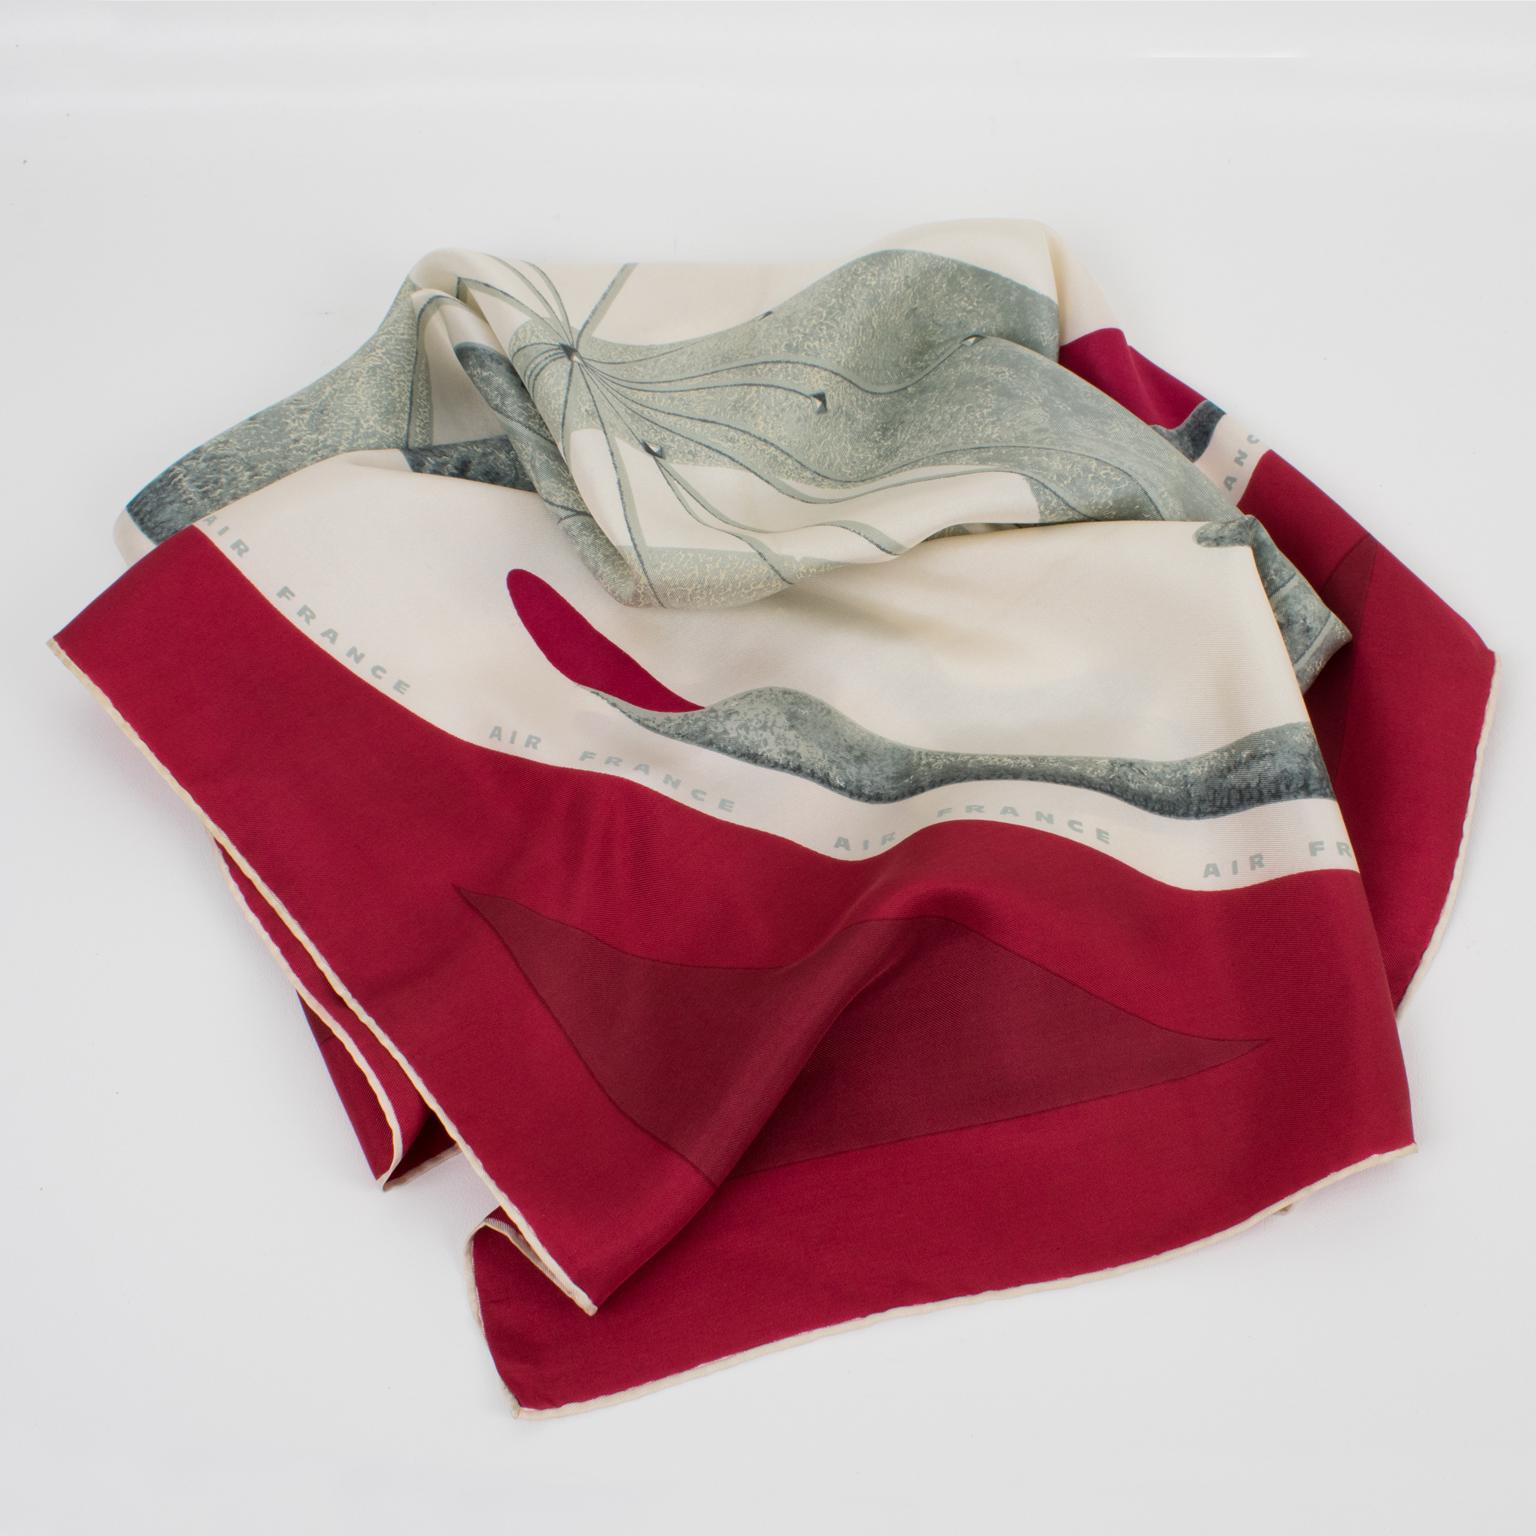 Air France Vintage 1970s Promotional Silk Scarf Red and Gray Print In Good Condition For Sale In Atlanta, GA